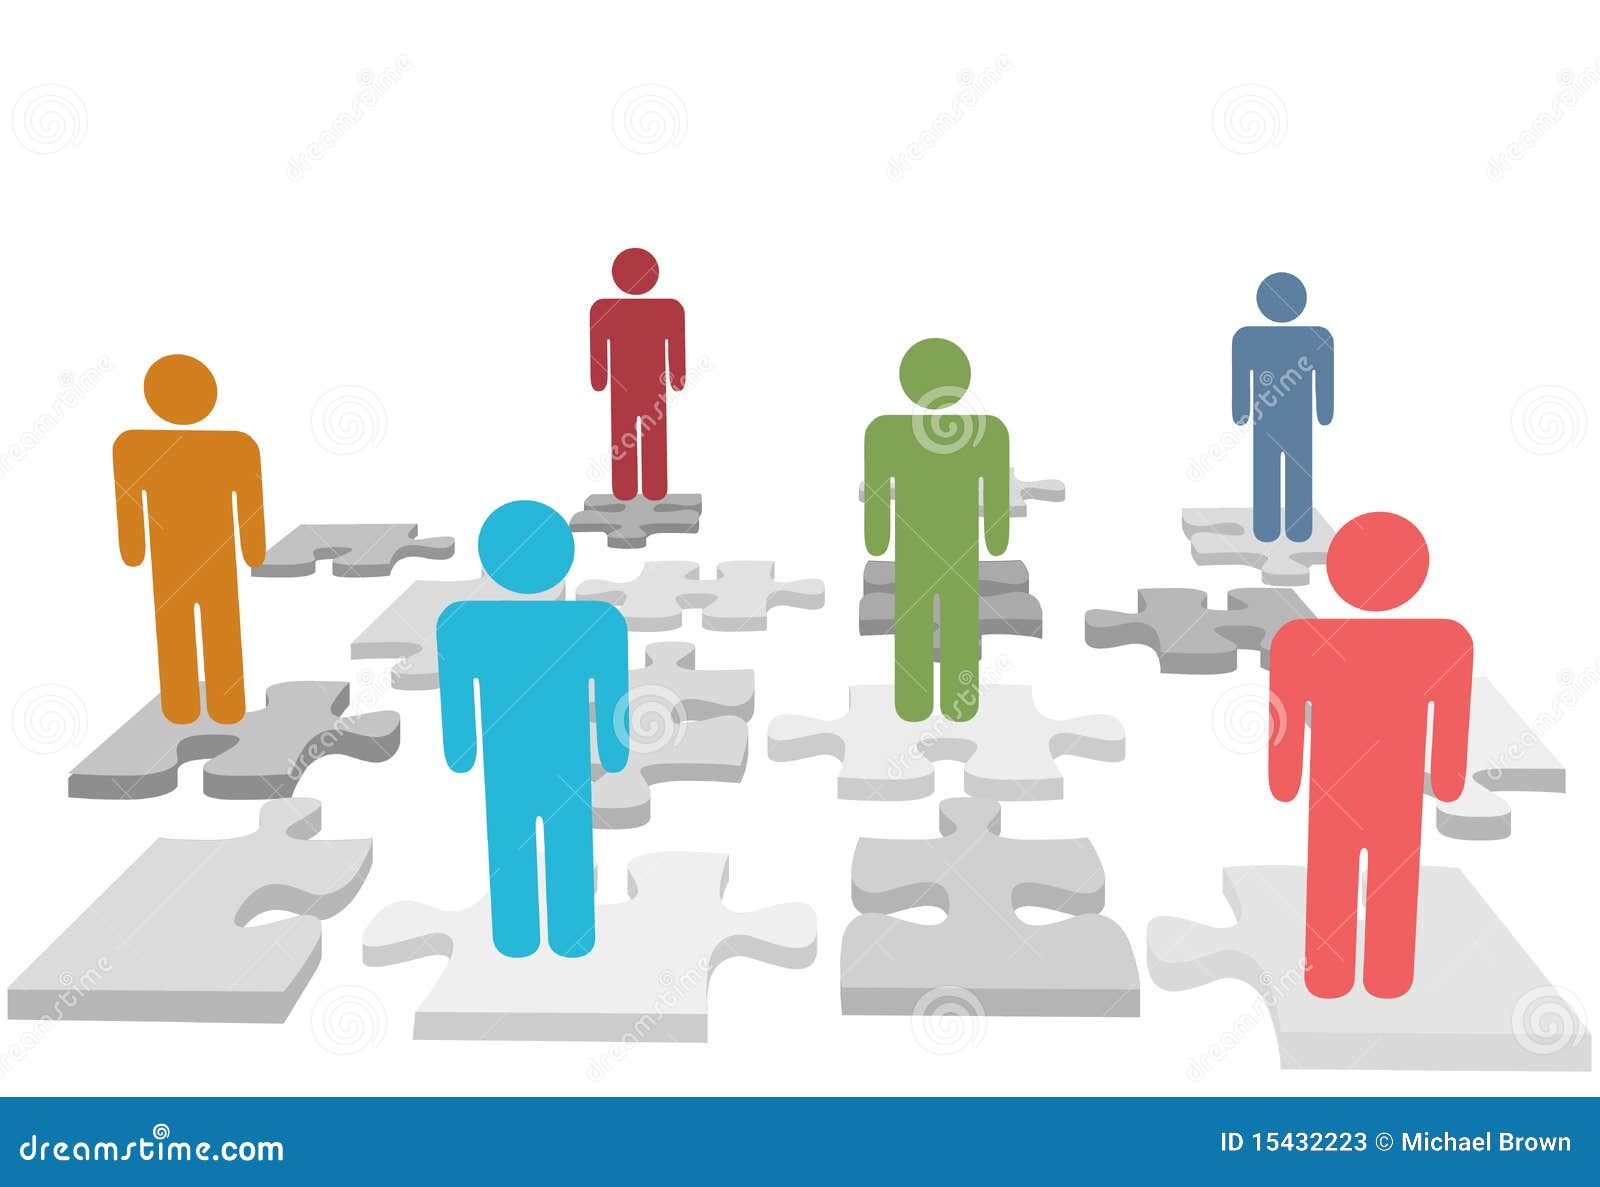 Human Resources People Stand On Puzzle Pieces Stock Photos